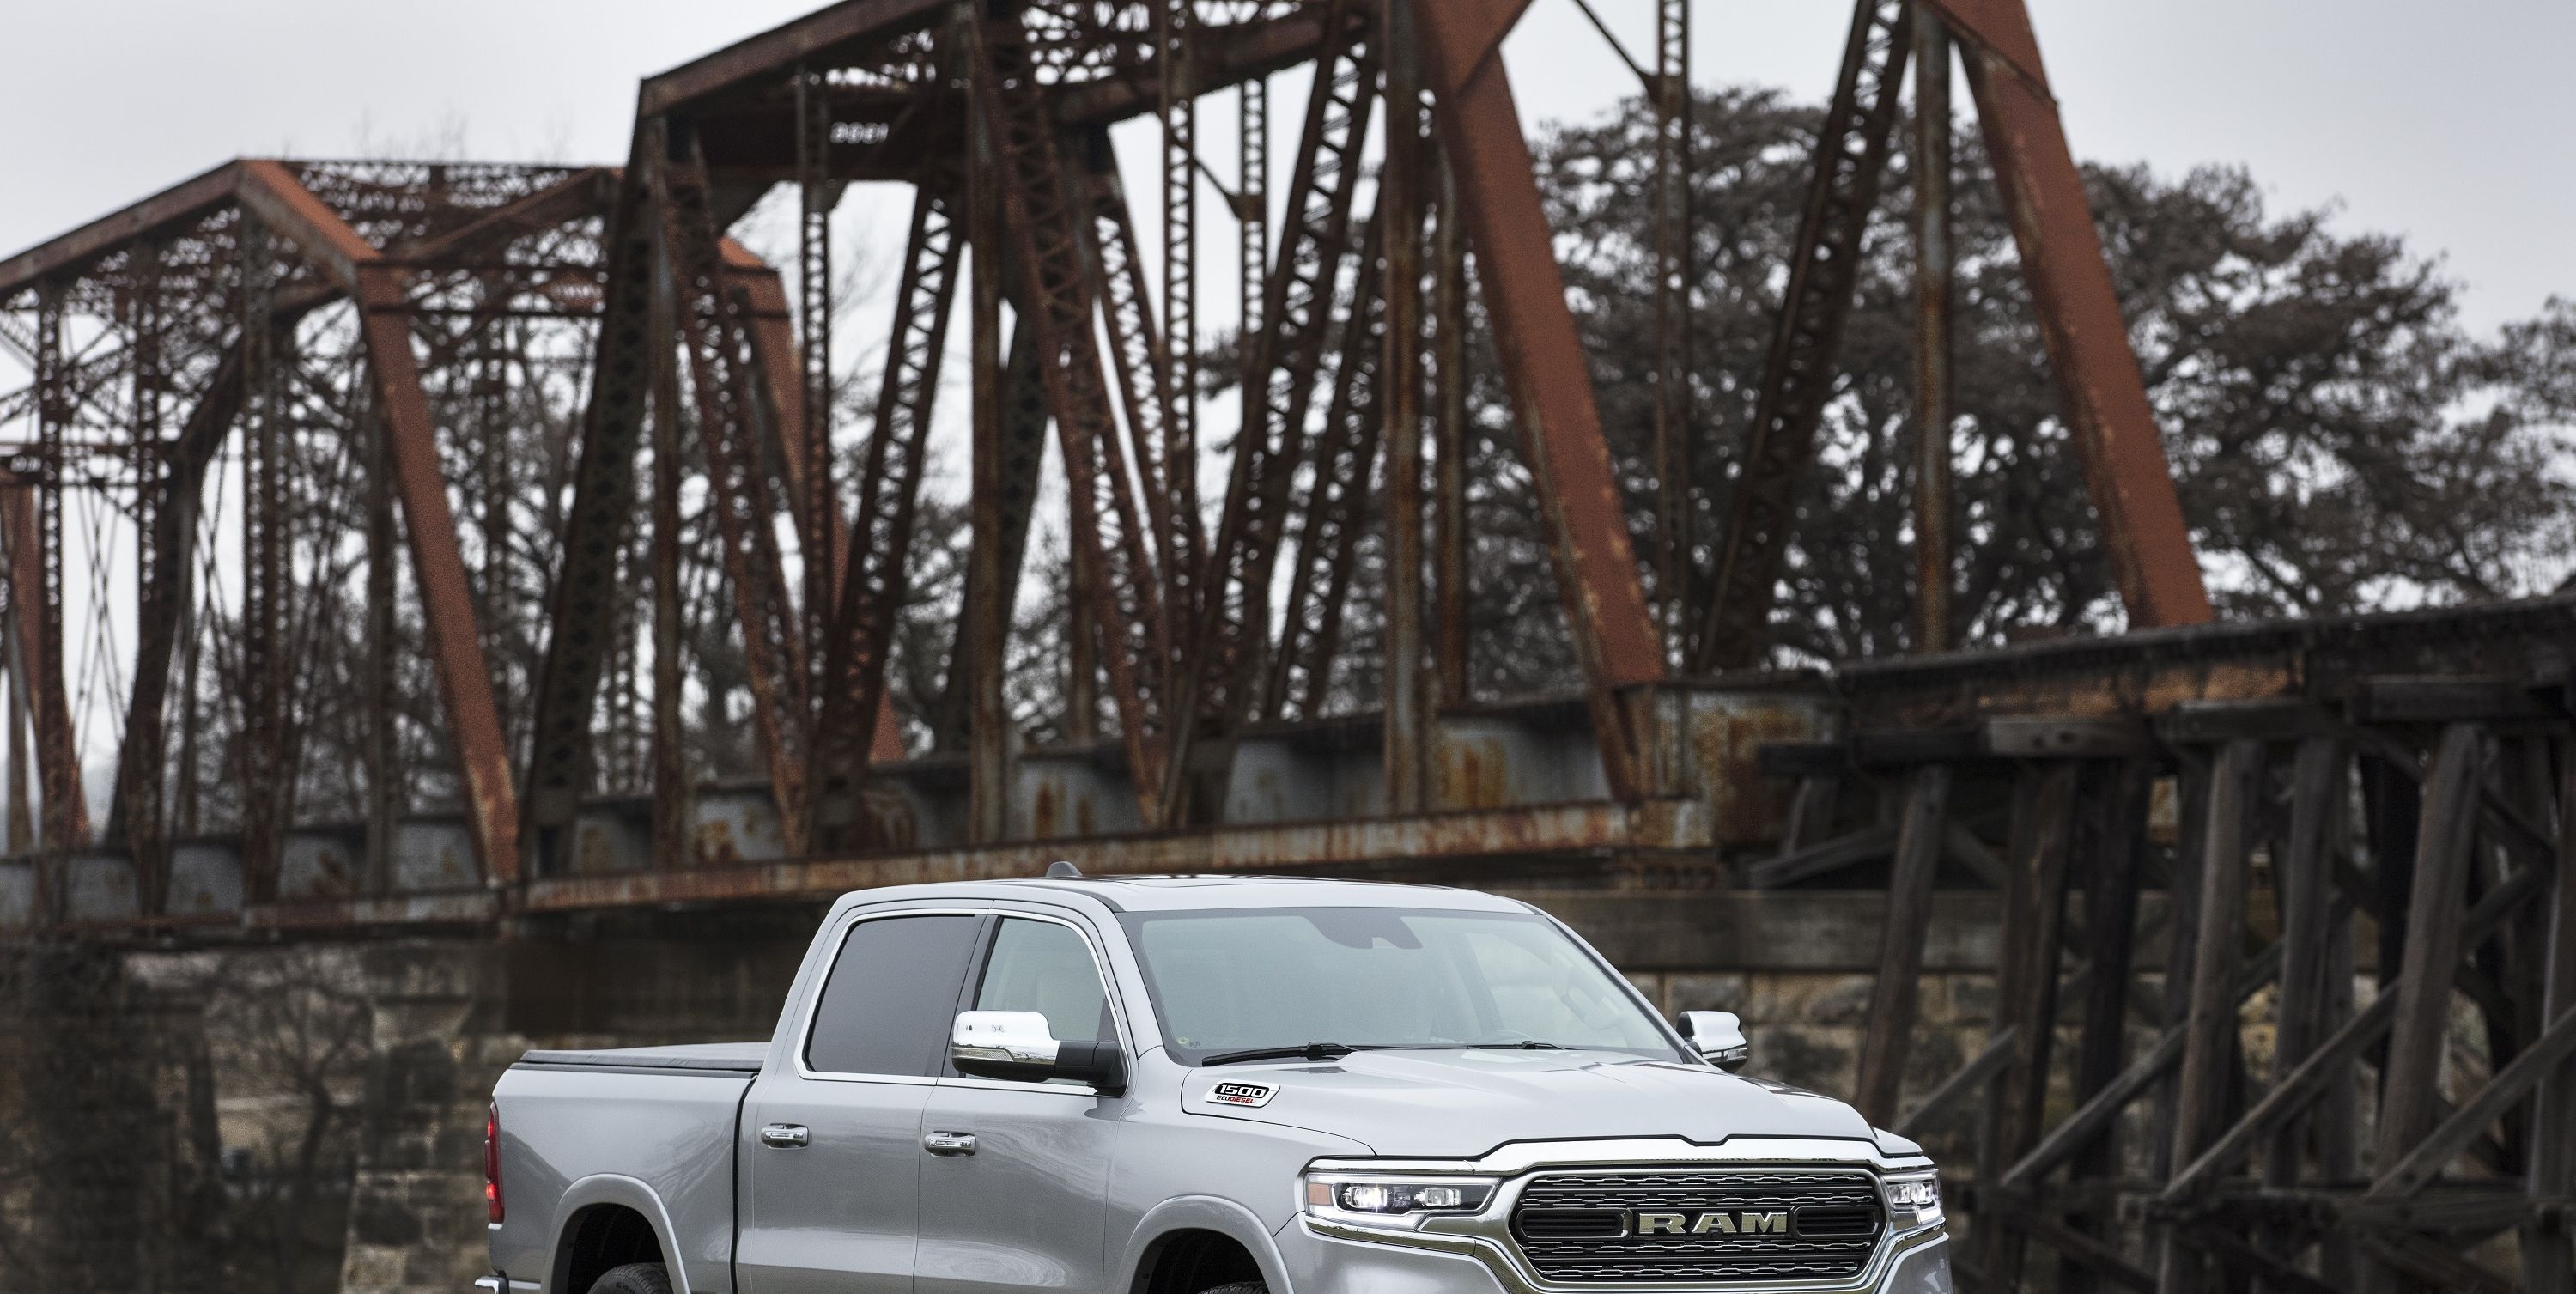 Recall: Software Glitch in 131,700 Ram Trucks Can Cause Stalling